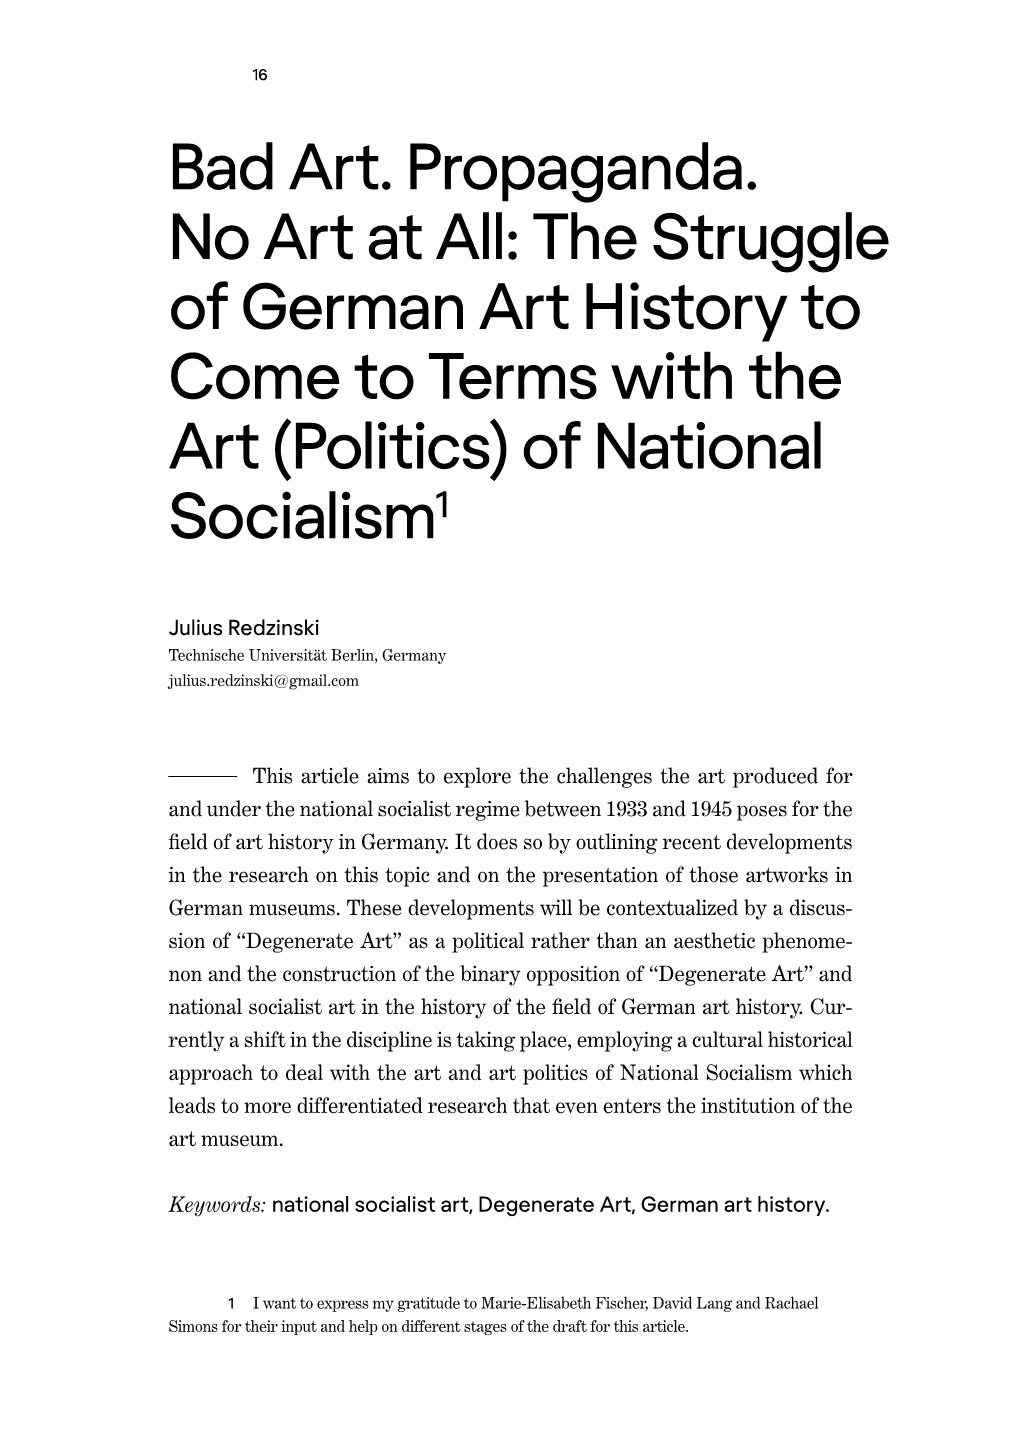 Bad Art. Propaganda. No Art at All: the Struggle of German Art History to Come to Terms with the Art (Politics) of National Socialism1